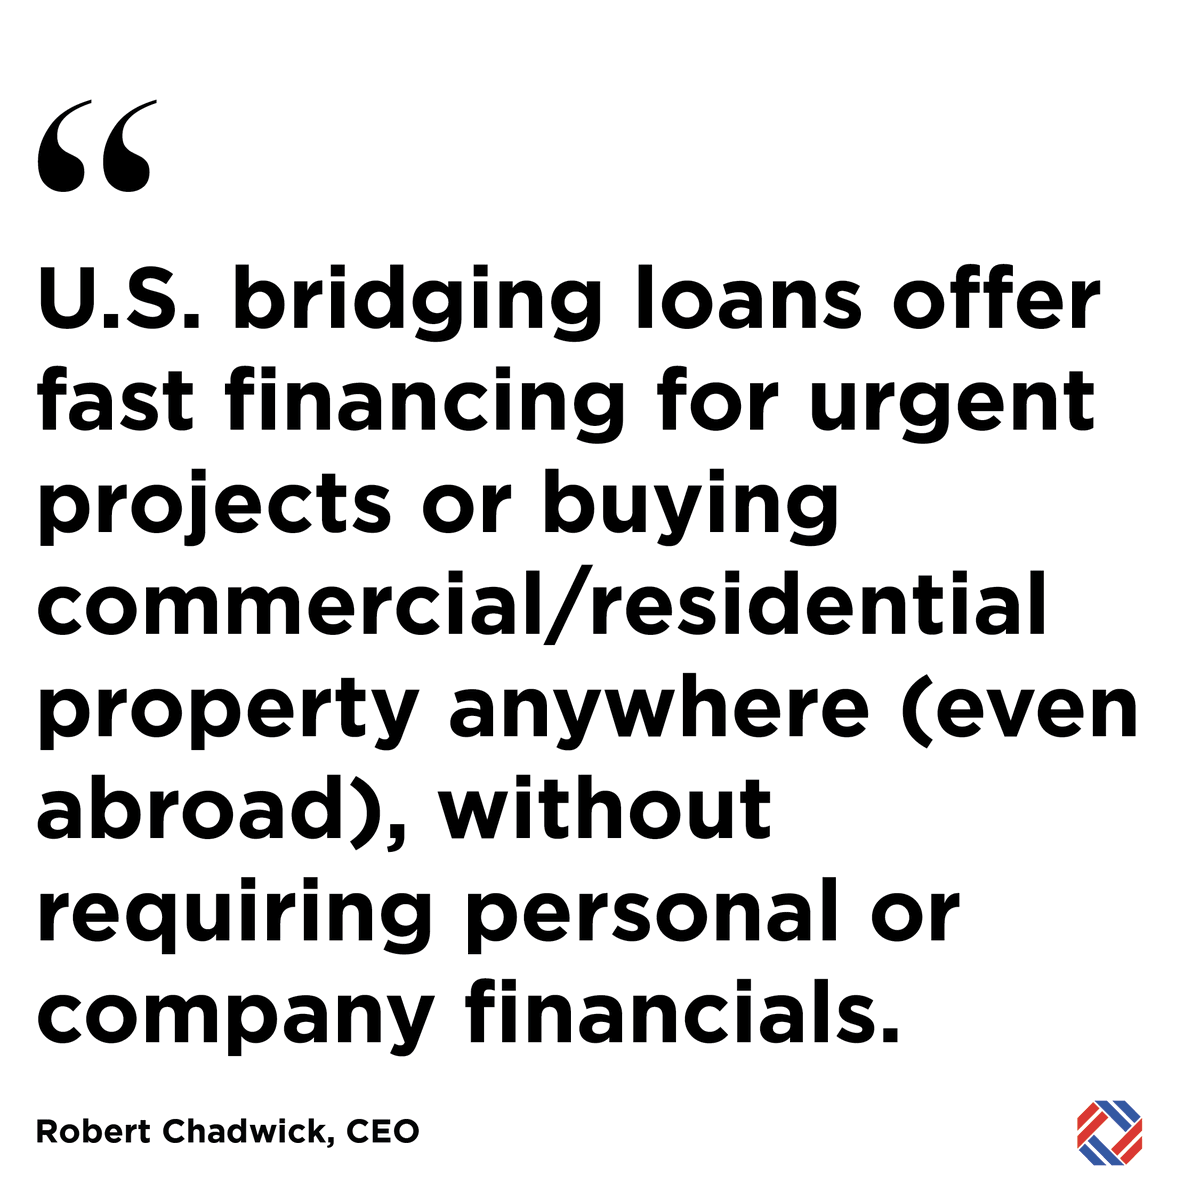 'U.S. bridging loans offer fast financing for urgent projects or buying commercial/residential property anywhere (even abroad), without requiring personal or company financials.' - Robert Chadwick, CEO

hello@americamortgages.com

#bridgeloans #bridgefinancing #bridgingloans